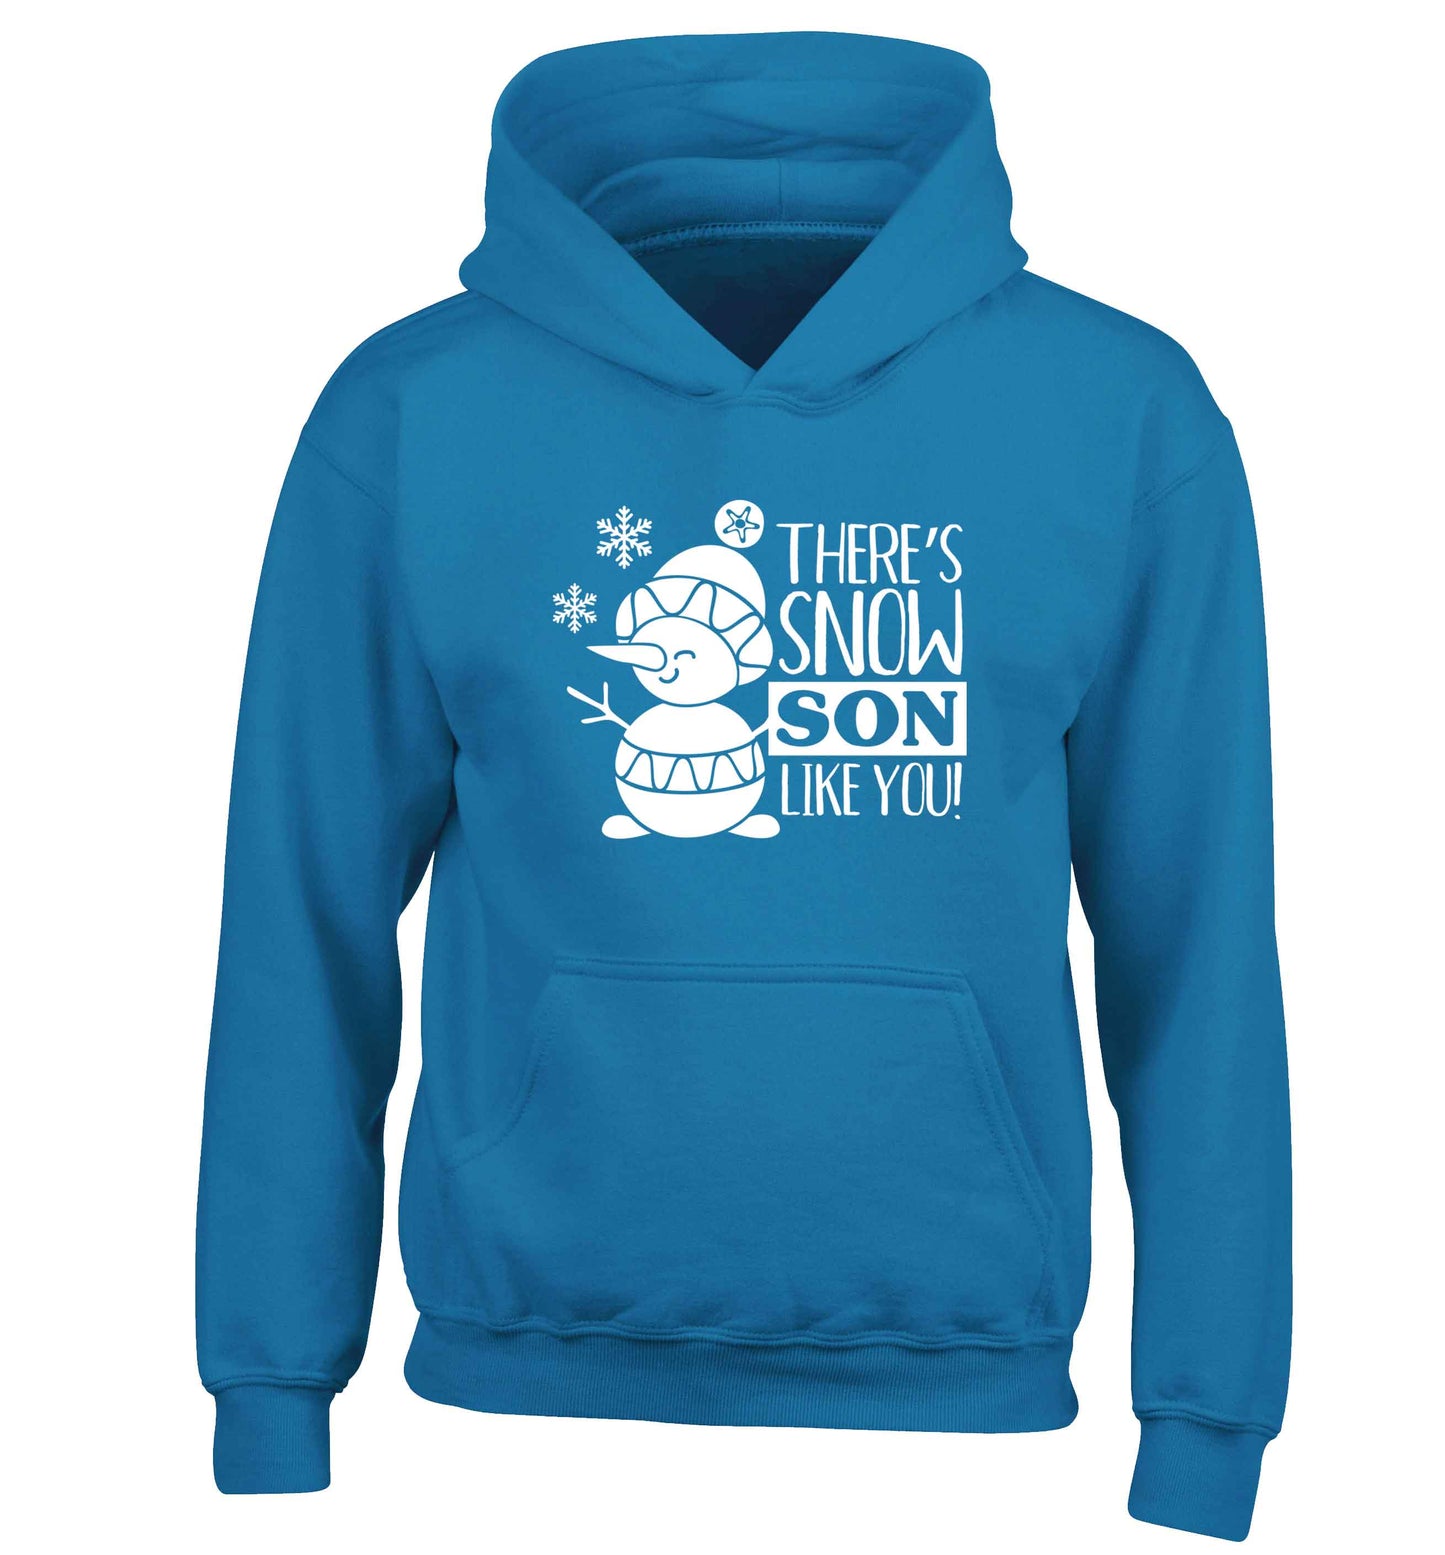 There's snow son like you children's blue hoodie 12-13 Years